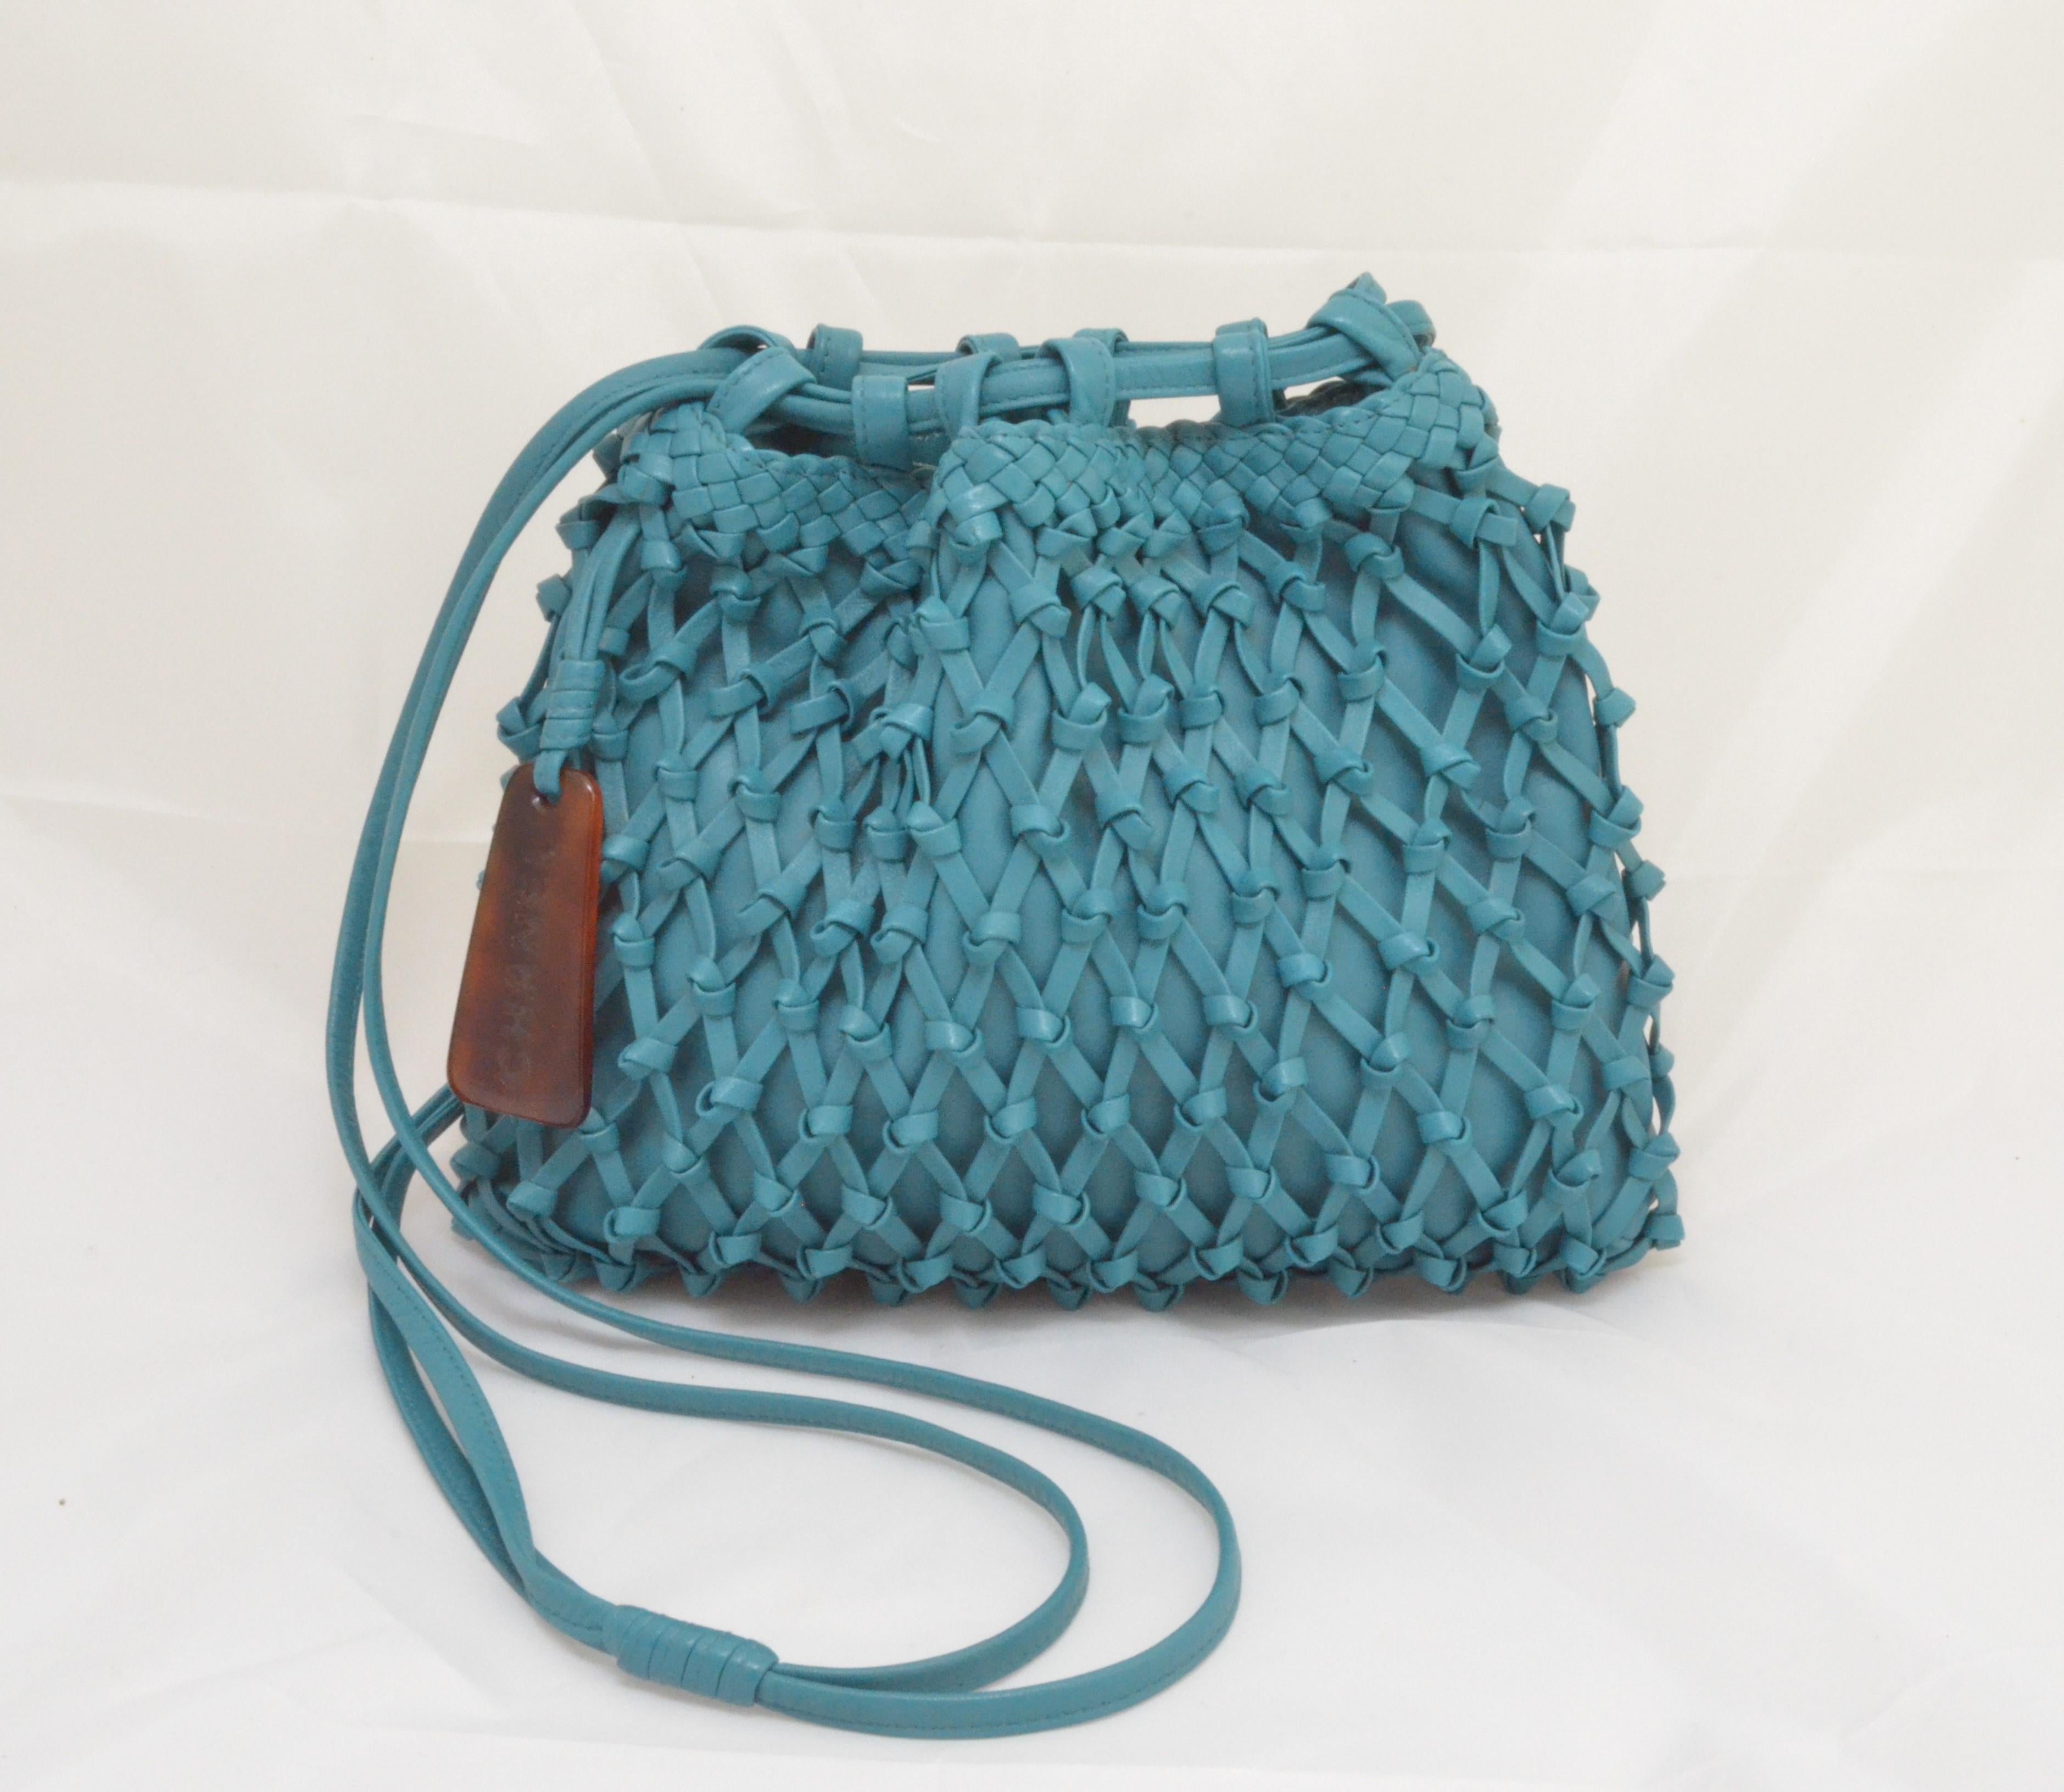 Chanel bag is featured in a teal-colored knotted leather with a tortoise and leather charm that hangs off the side of the bag, and dual leather strap handles. Interior is fully lined in leather and has one zipper pocket. Made in Italy.

Very good